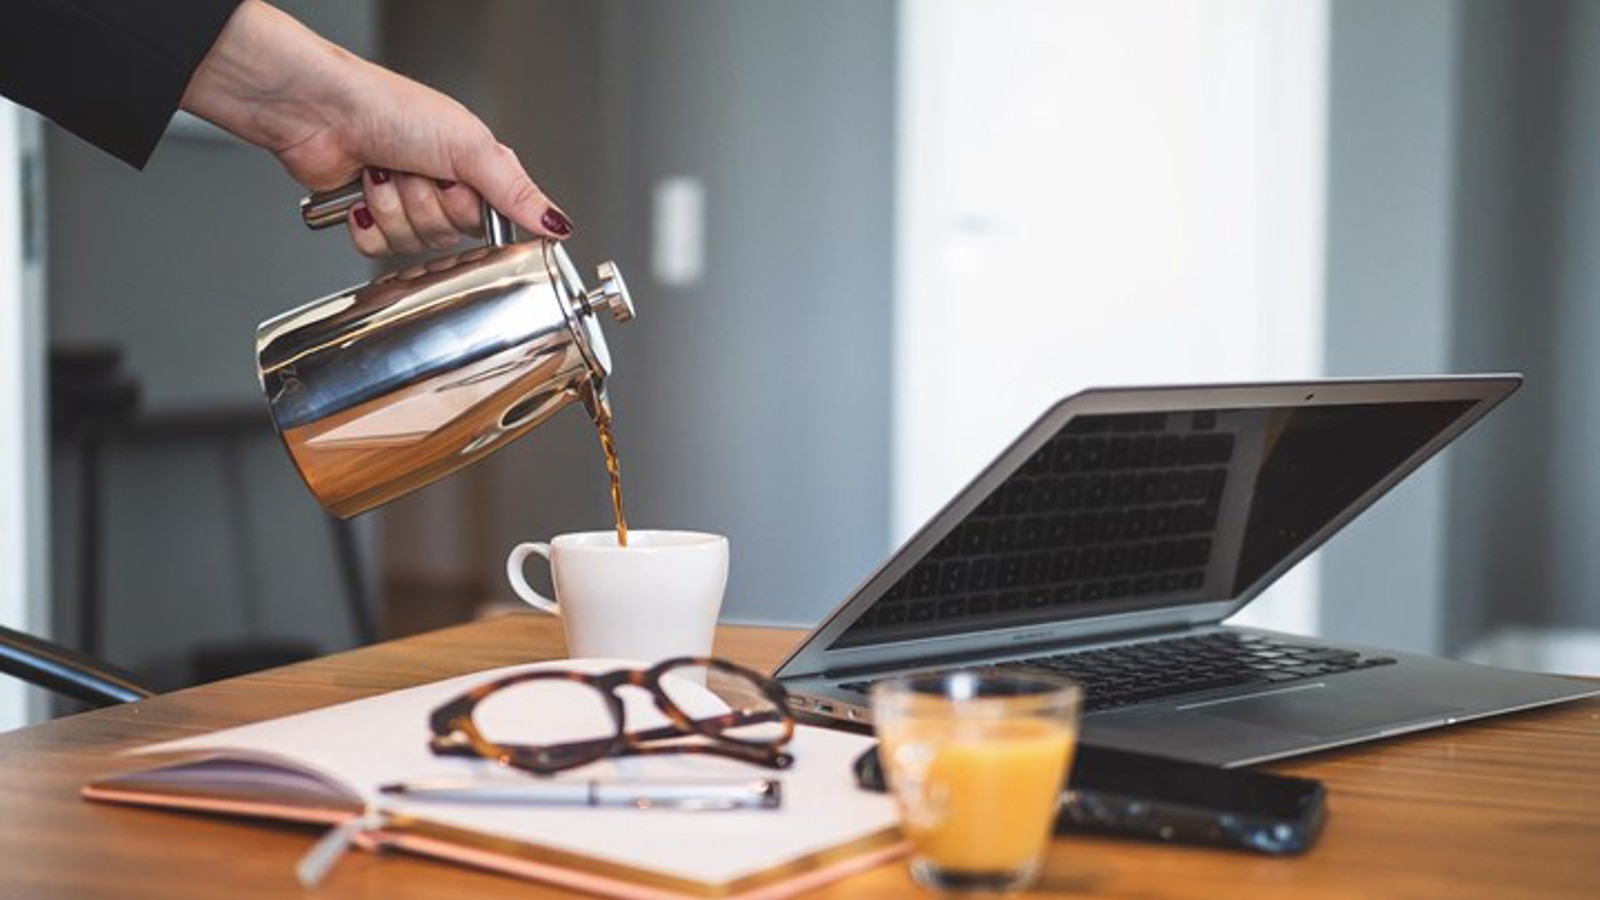 Close-up of hand pouring coffee, with open book and laptop in the foreground